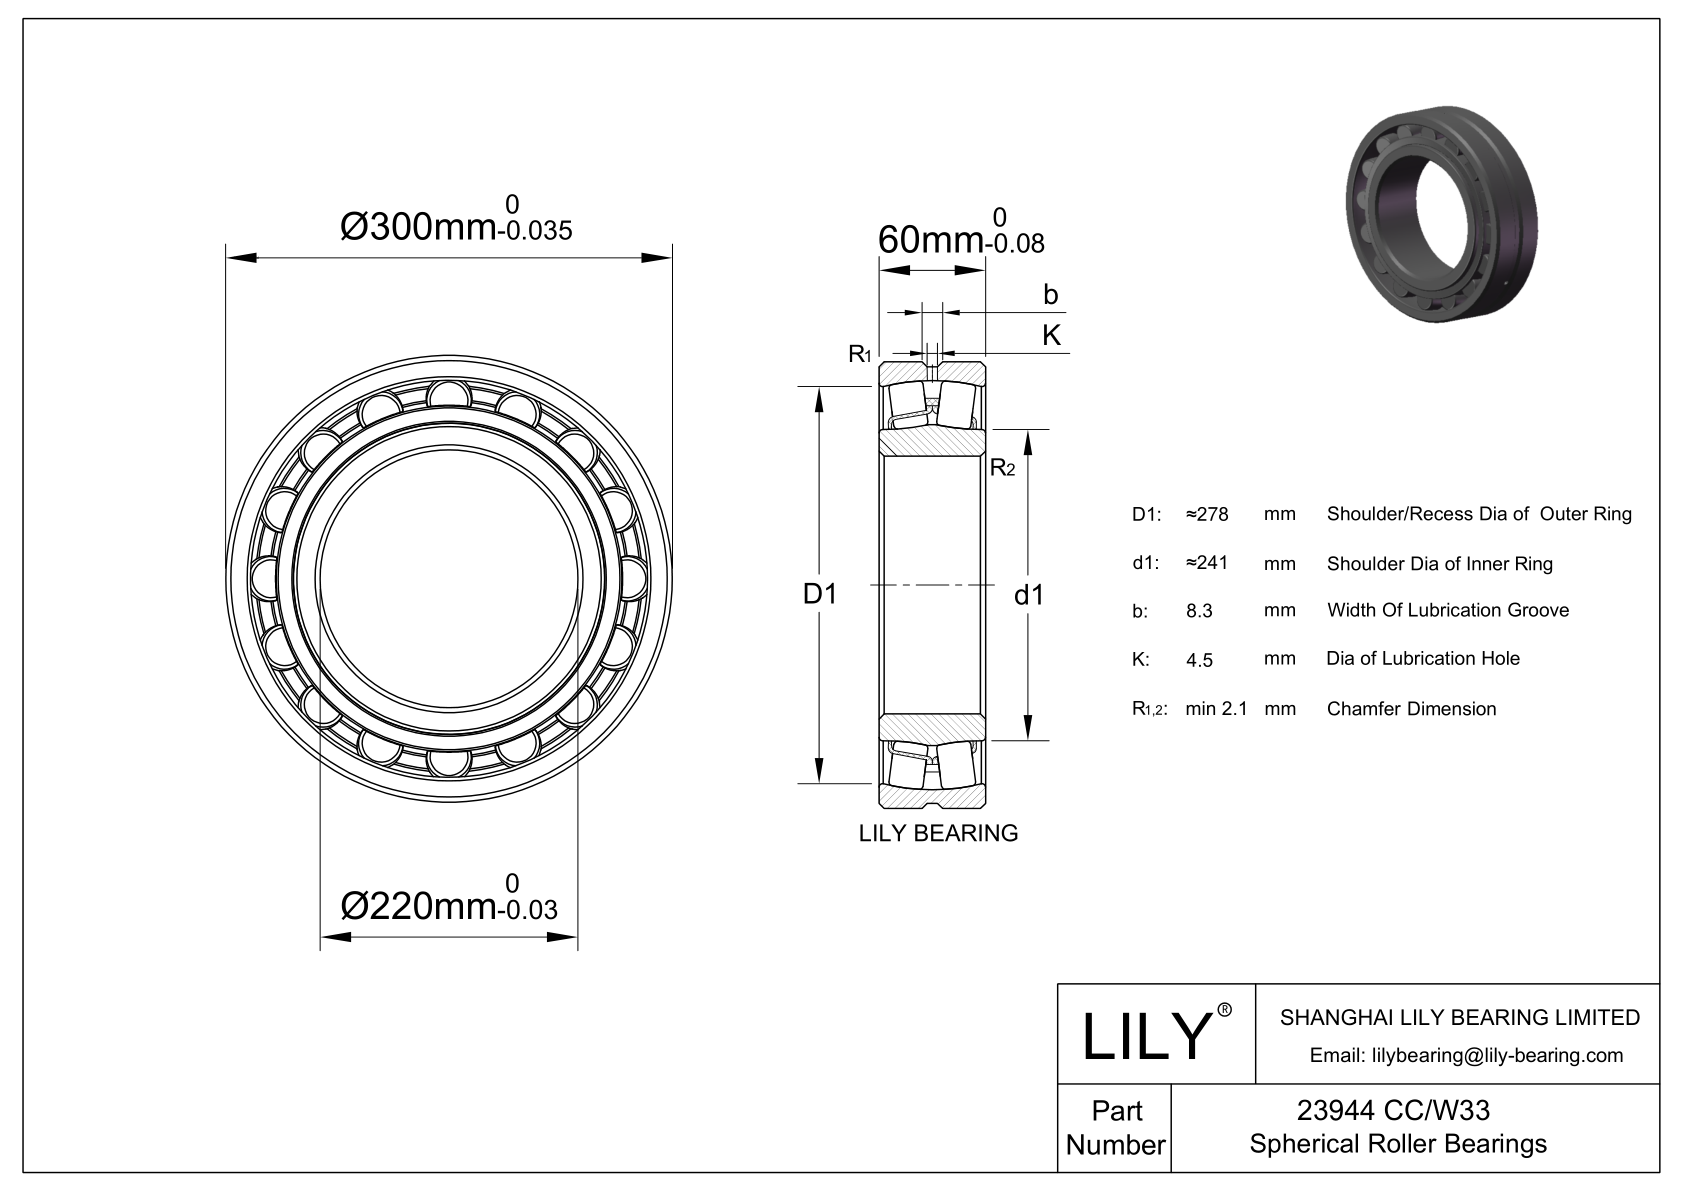 23944 CC/W33 Double Row Spherical Roller Bearing cad drawing